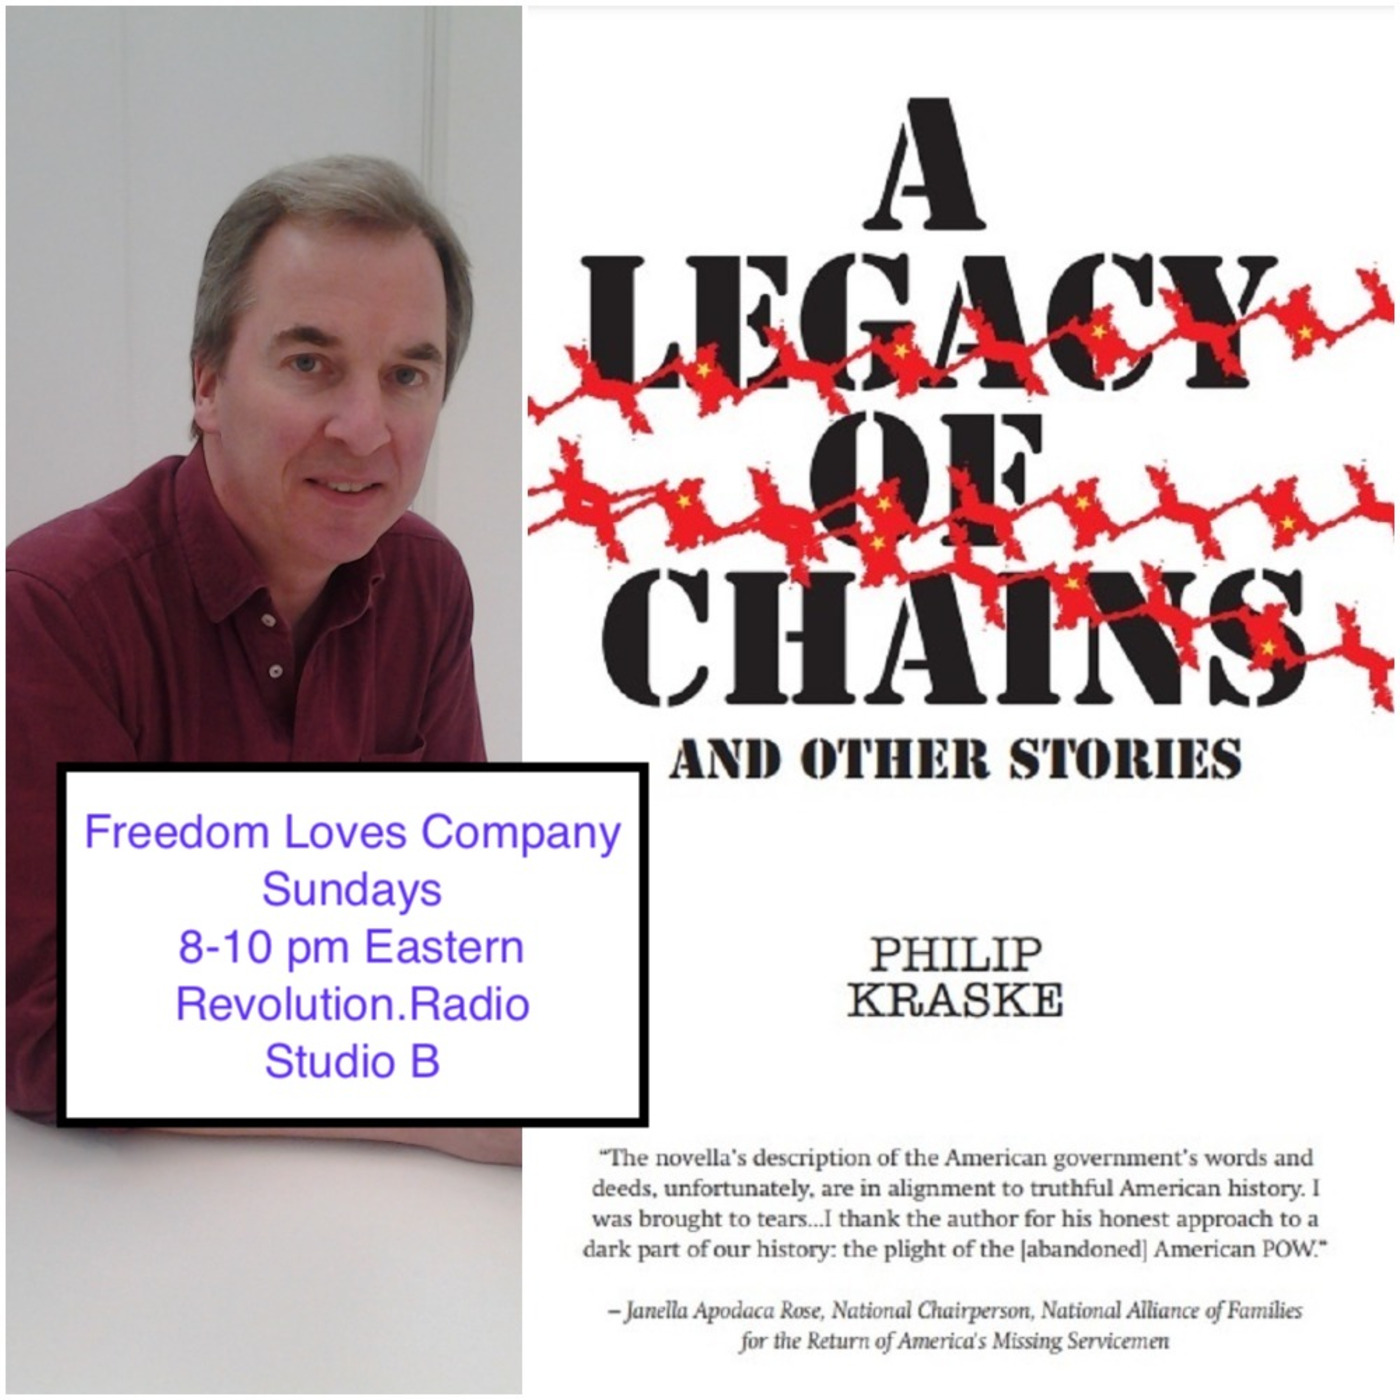 Episode 417: A Legacy of Chains: A Conversation with Philip Kraske